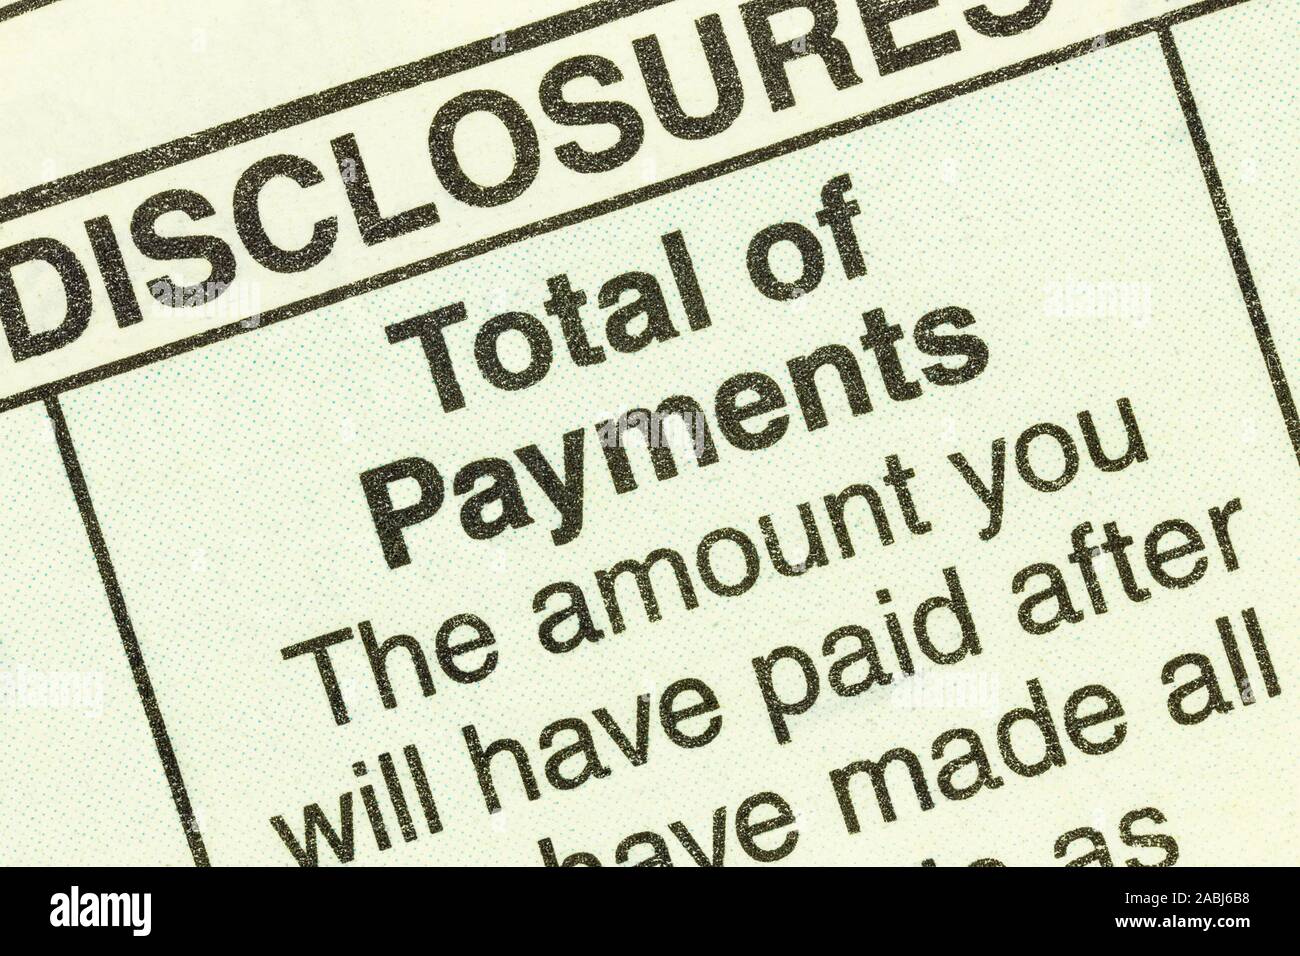 Close up macro view of total number of loan payments detail in the standard federal truth in lending section on an automobile purchase loan form. Stock Photo